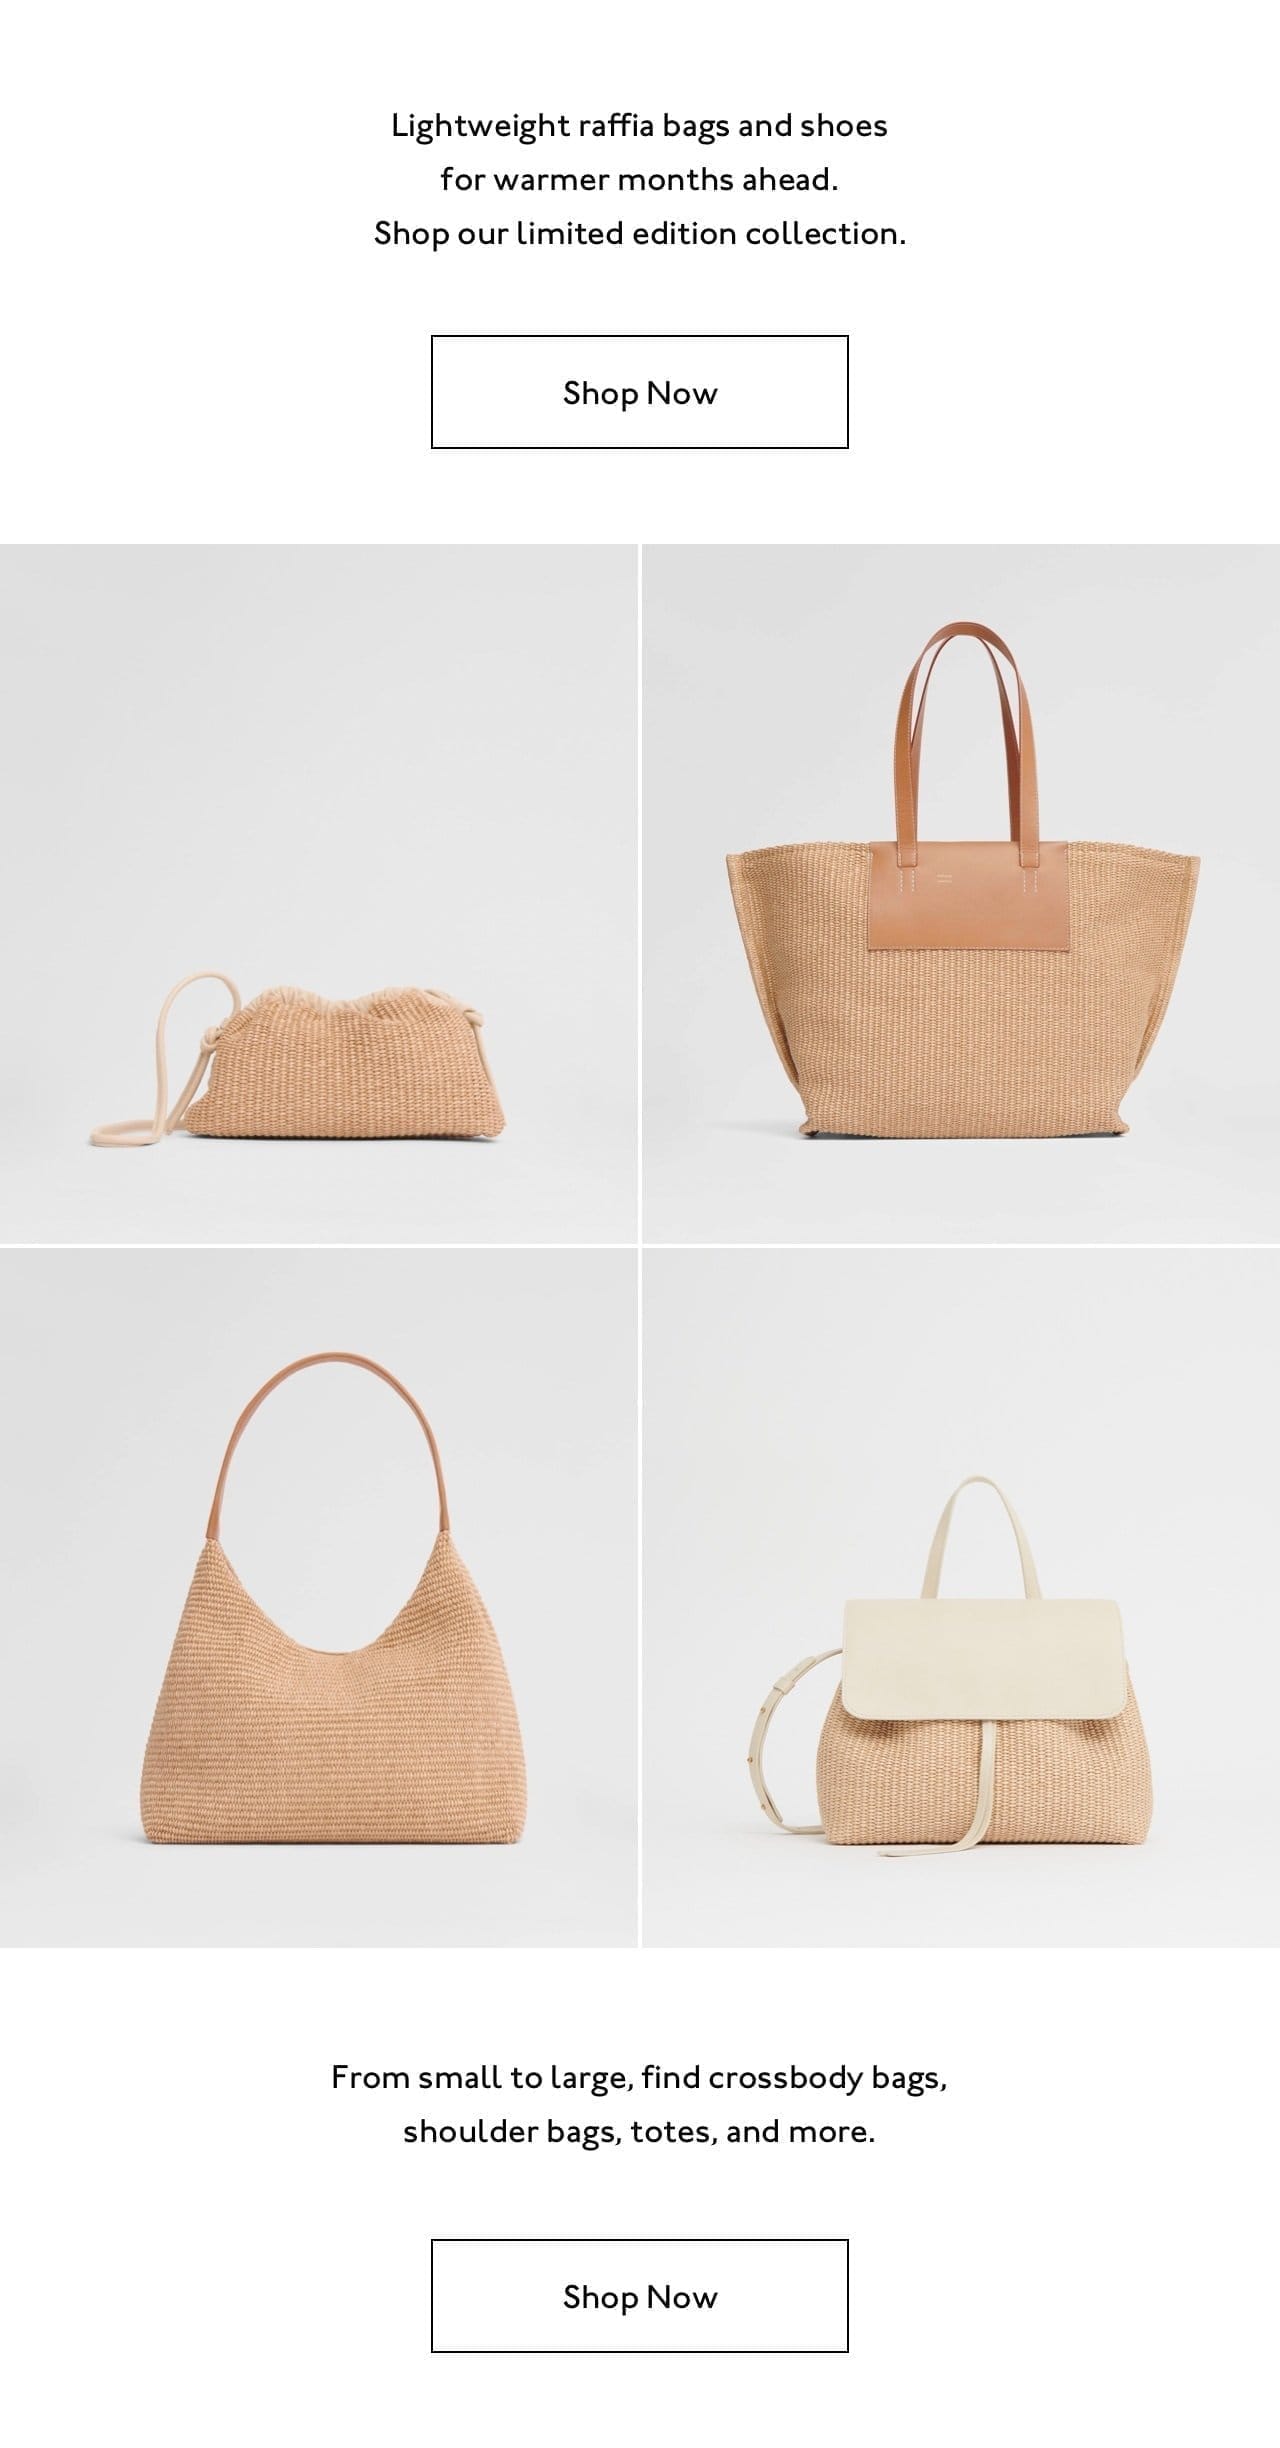 Lightweight raffia bags and shoes for warmer months ahead. Shop our limited edition collection.